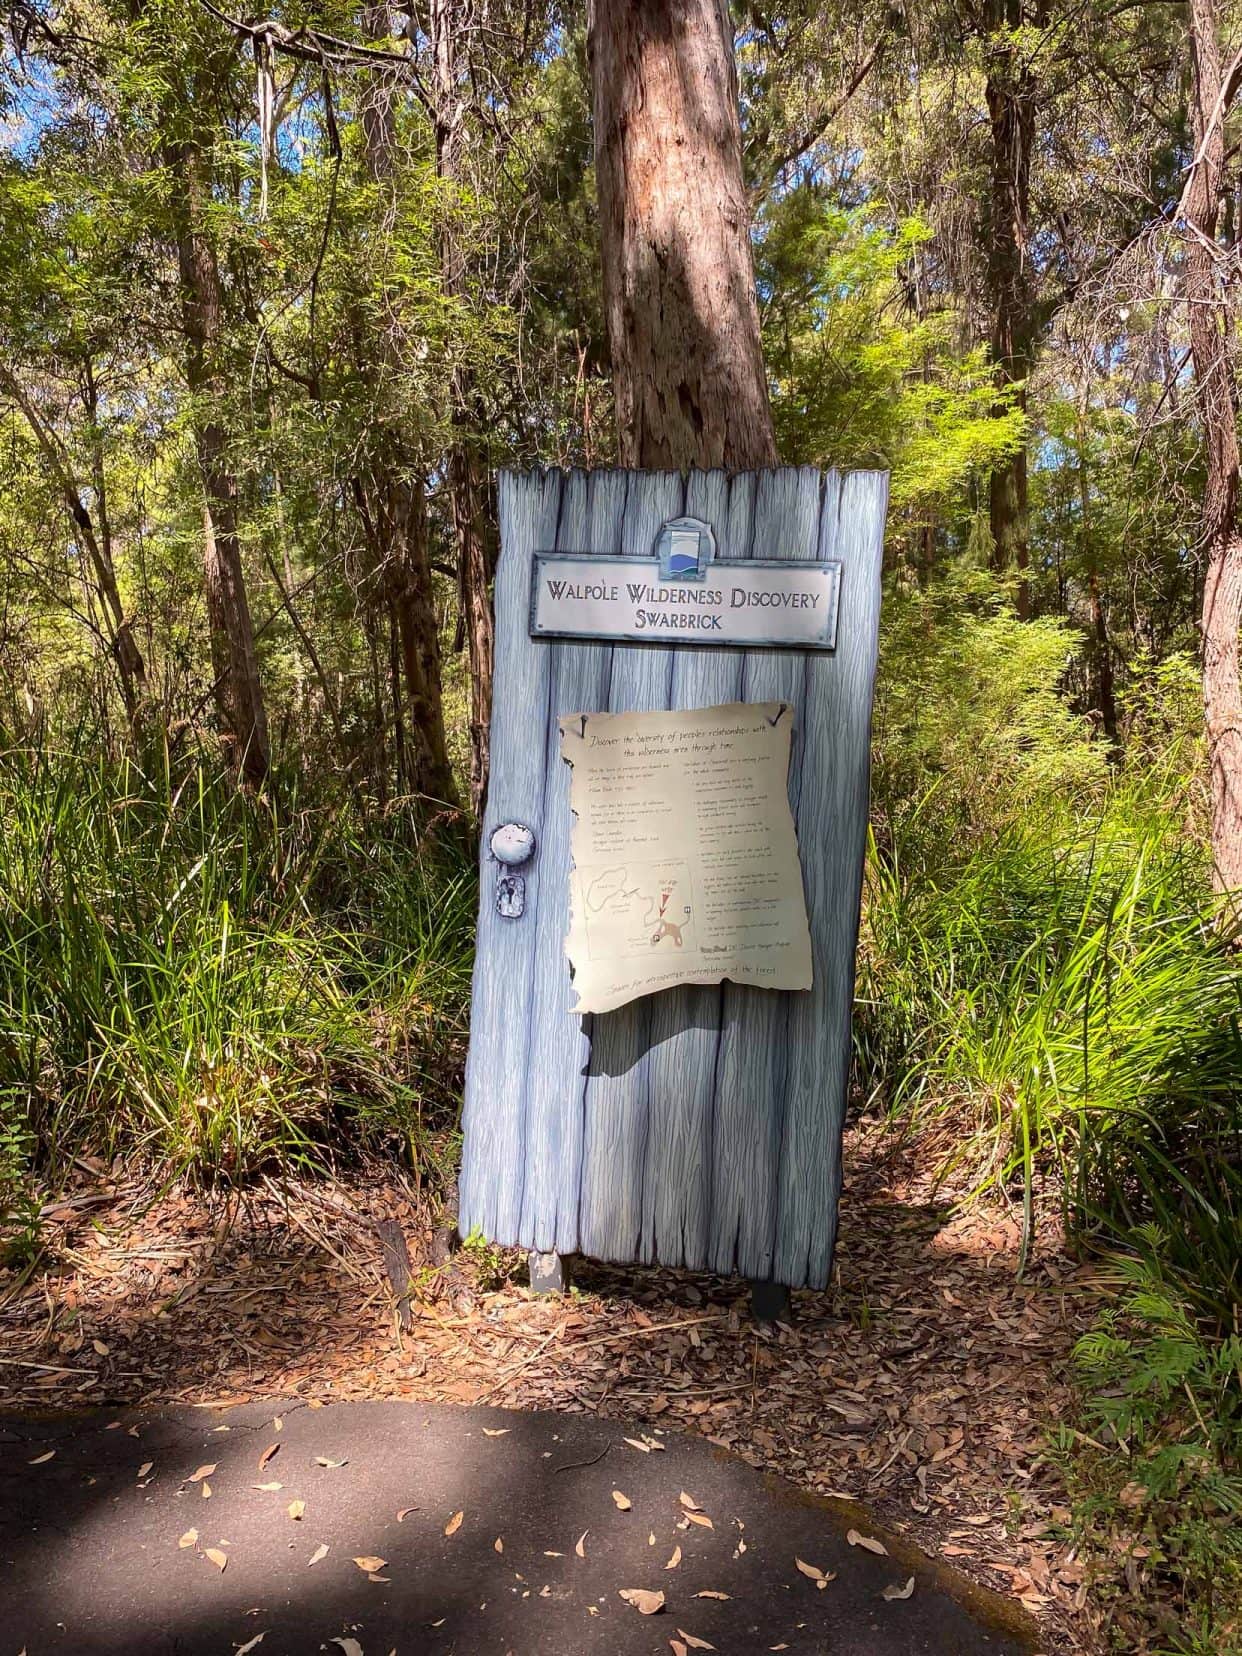 Swarbrick Art Loop door of perception - a blue dooor placed against a tree among the forest 